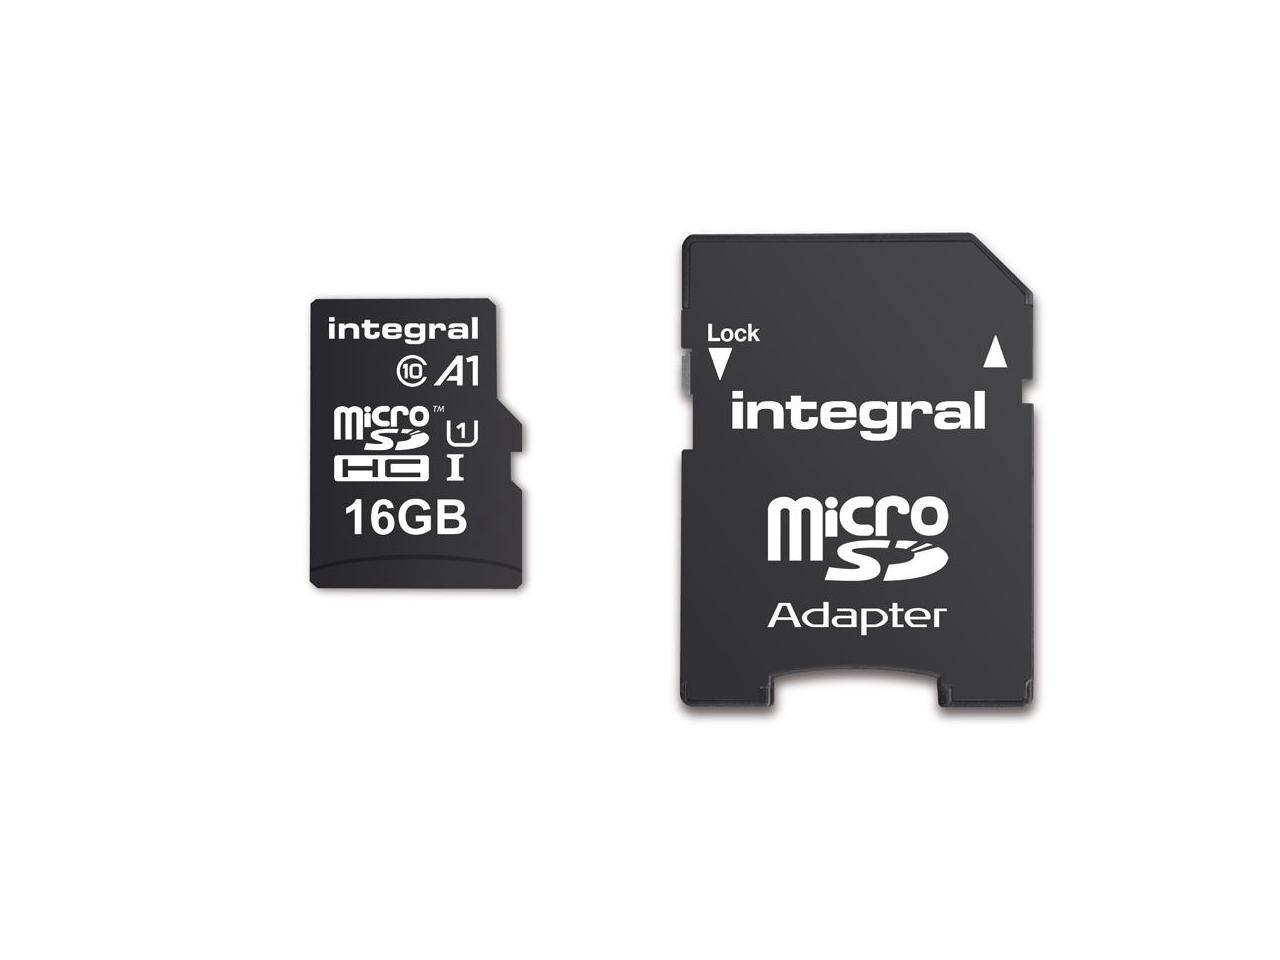 Integral 16GB A1 App Performance microSDHC CL10/UHS-I for Android Tablets/Phones Memory Card Model INMSDH16G10-A1